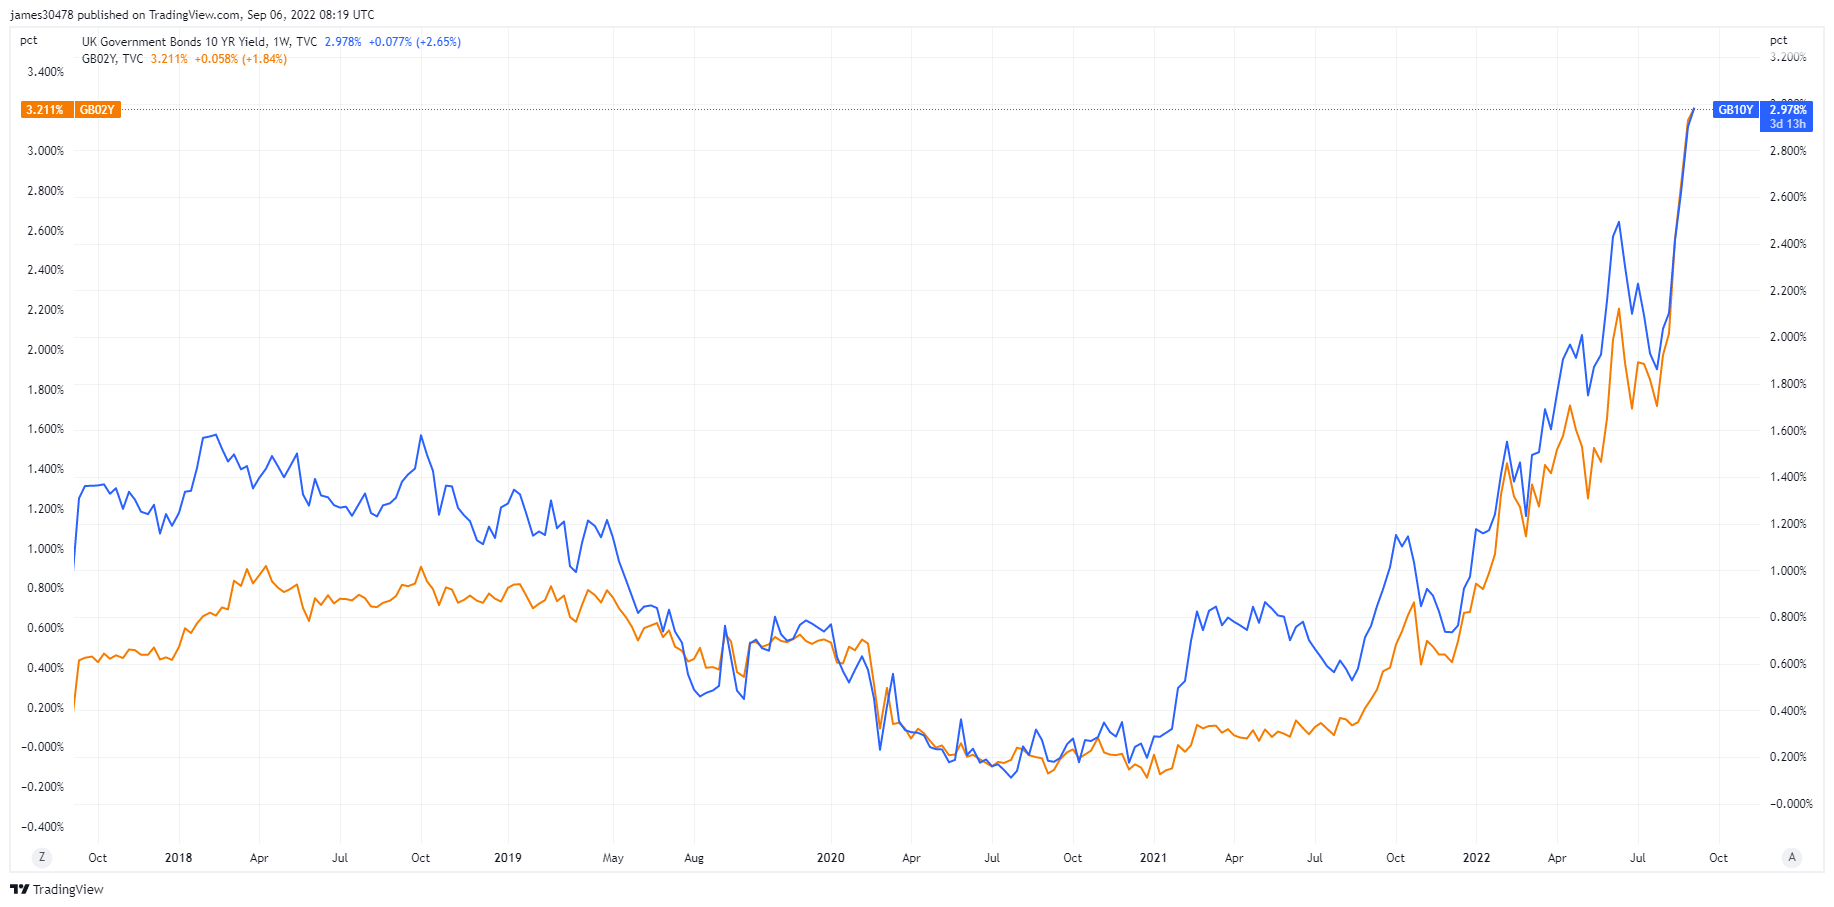 Two year and ten year bond yields